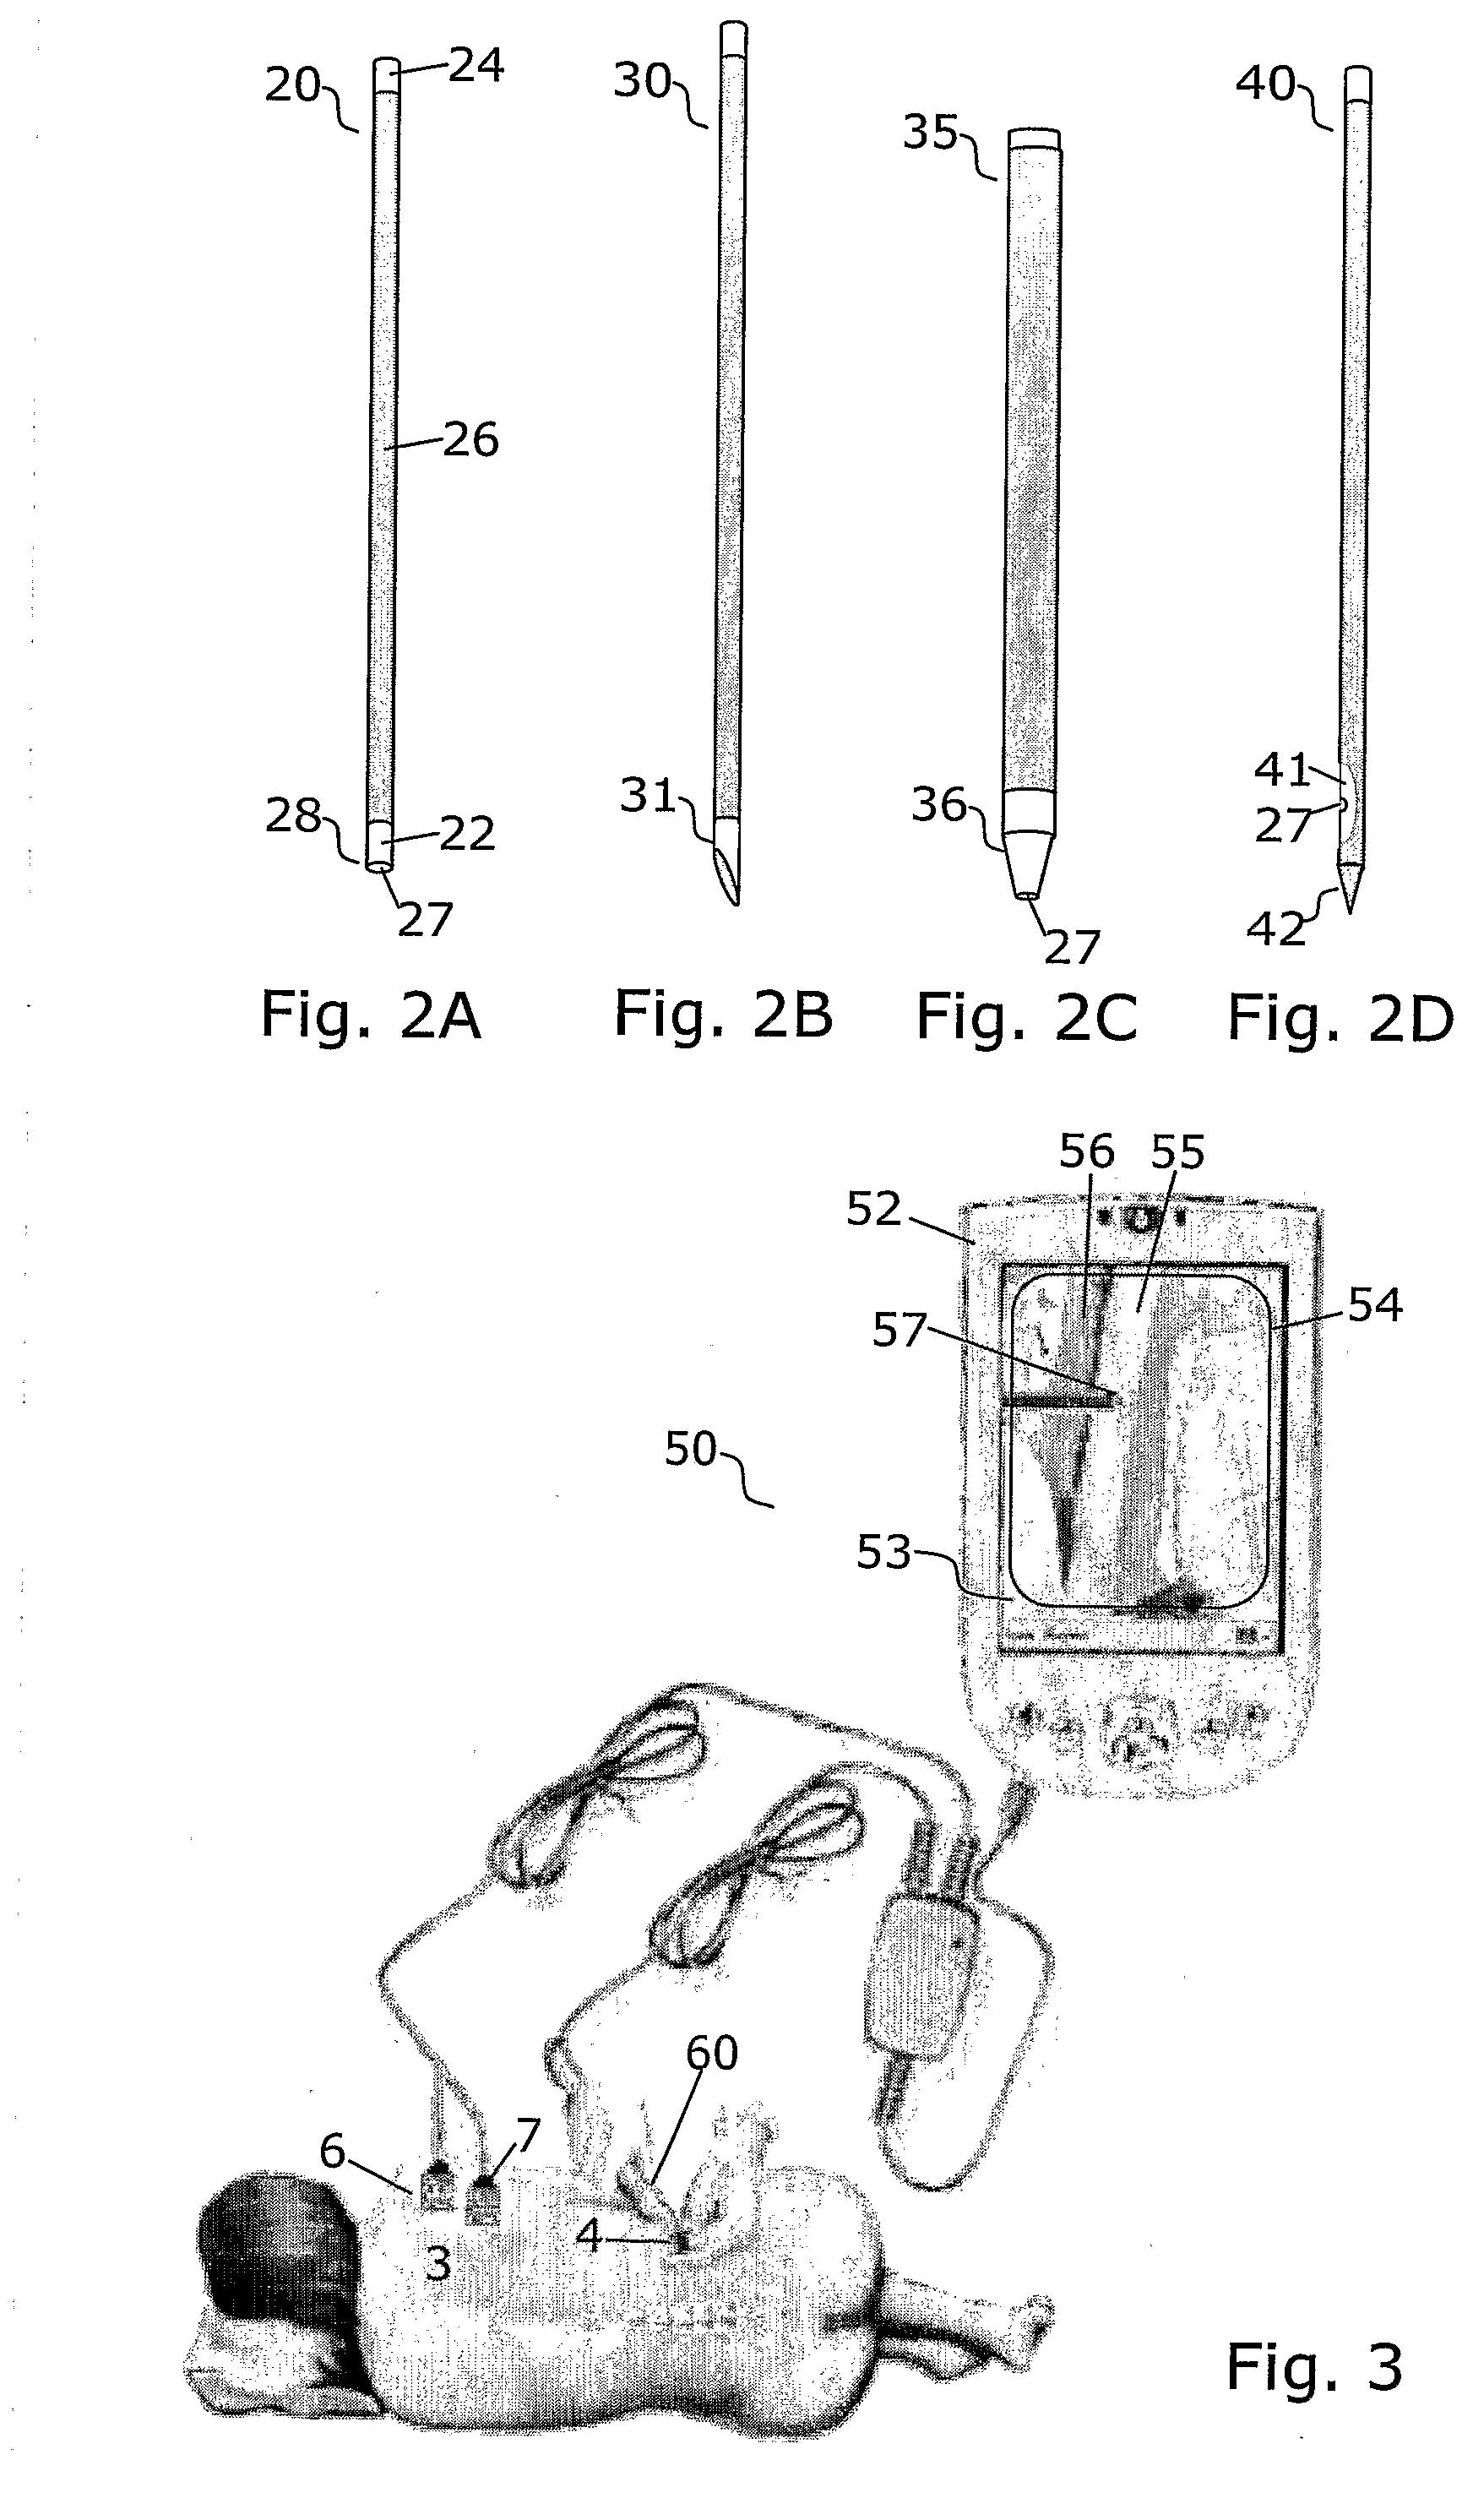 Method and apparatus for determining local tissue impedance for positioning of a needle